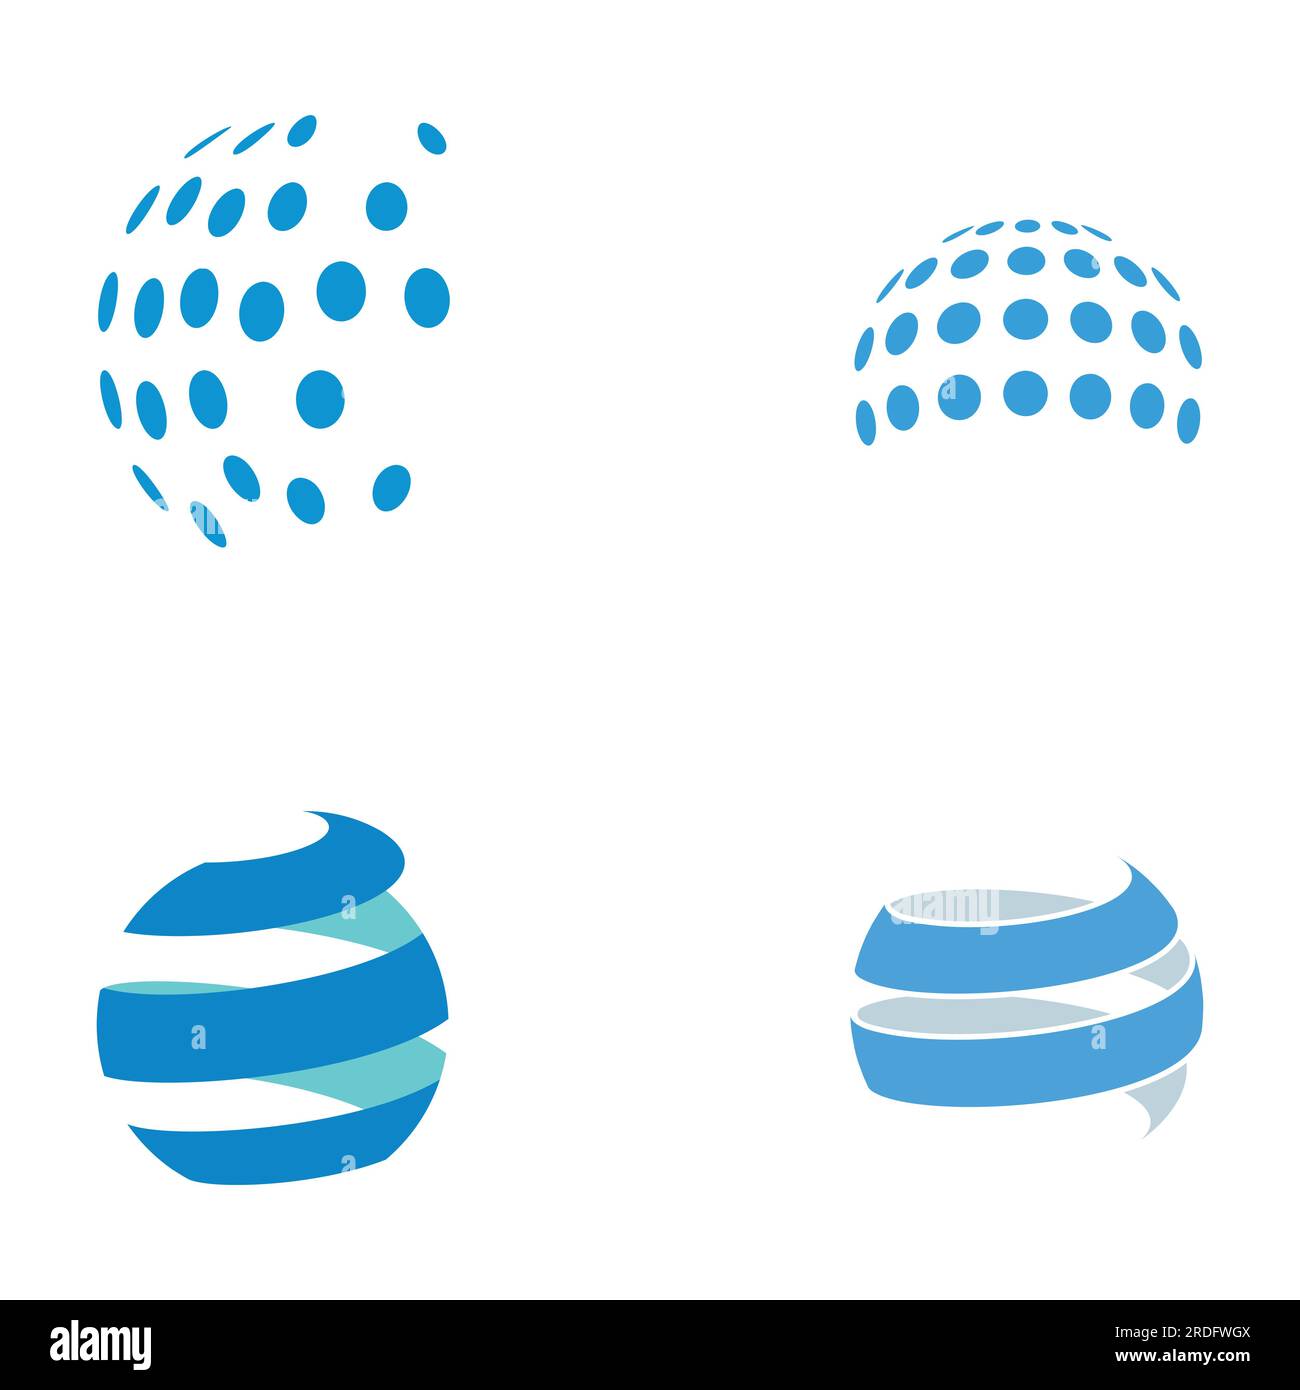 Modern globe or globe or global logo vector design.World logo with abstract shapes, lines and circles.Logos for technology, companies and businesses. Stock Vector